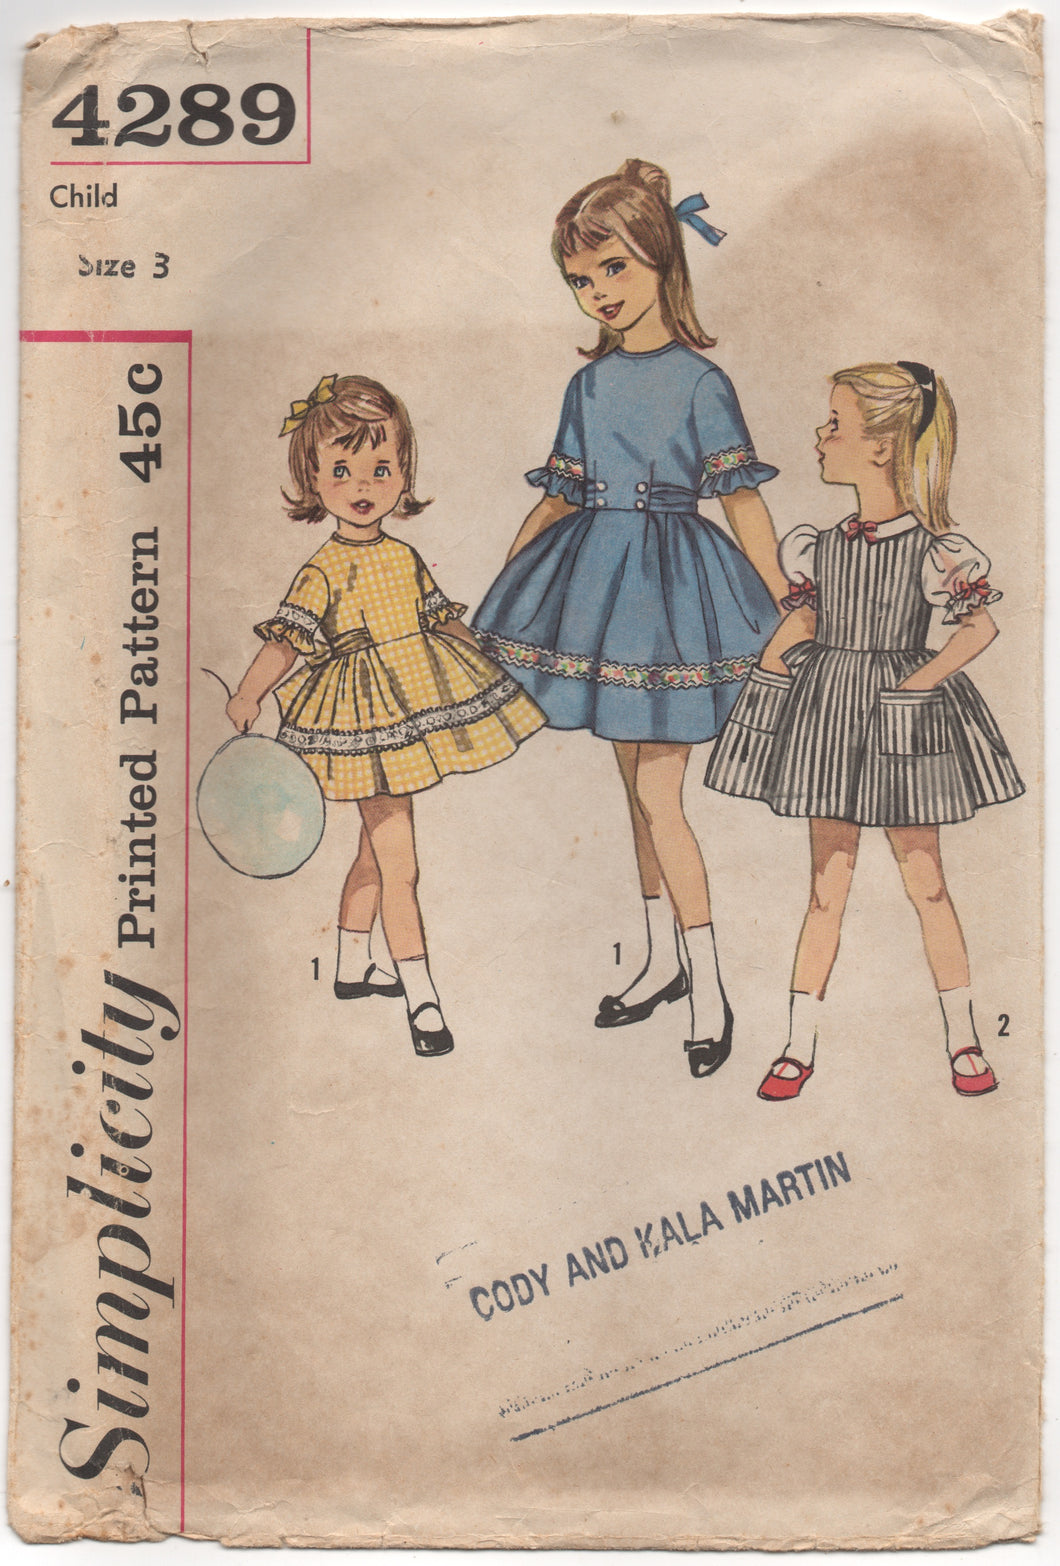 1960's Simplicity Girl's One Piece Dress with Tie Sash Pattern - Chest 22